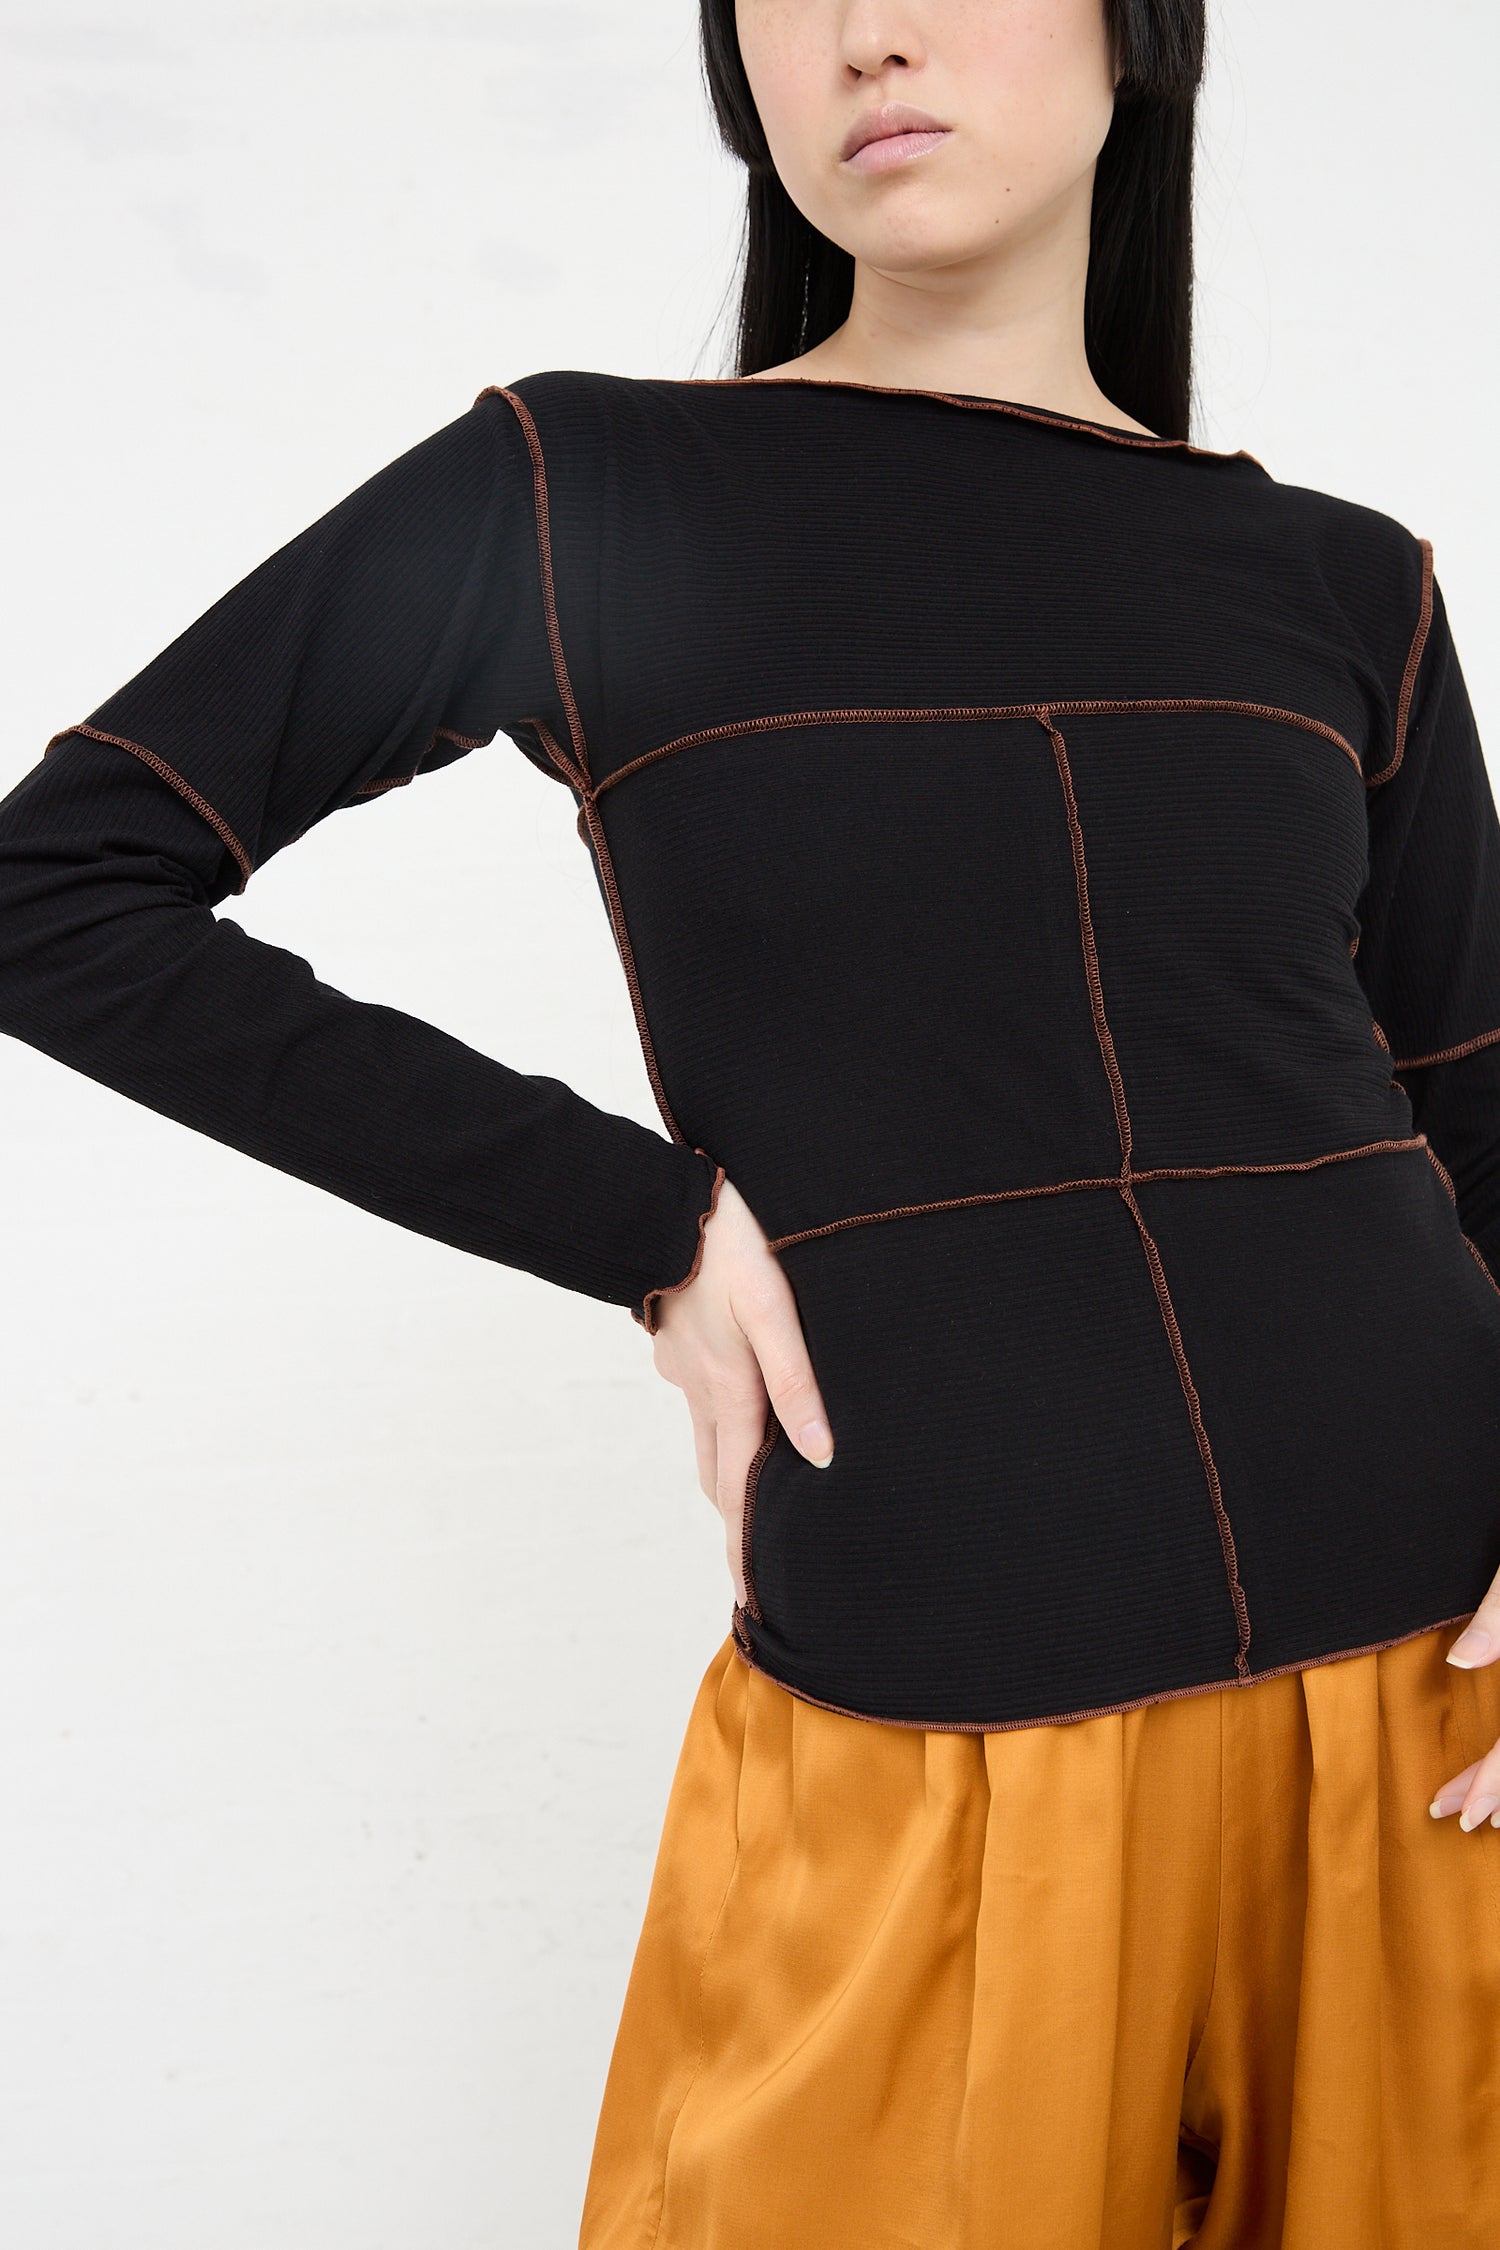 Woman wearing a Baserange Organic Cotton Rib Cinder Long Sleeve in Black with brown stitching, posing with hand on hip against a white background.